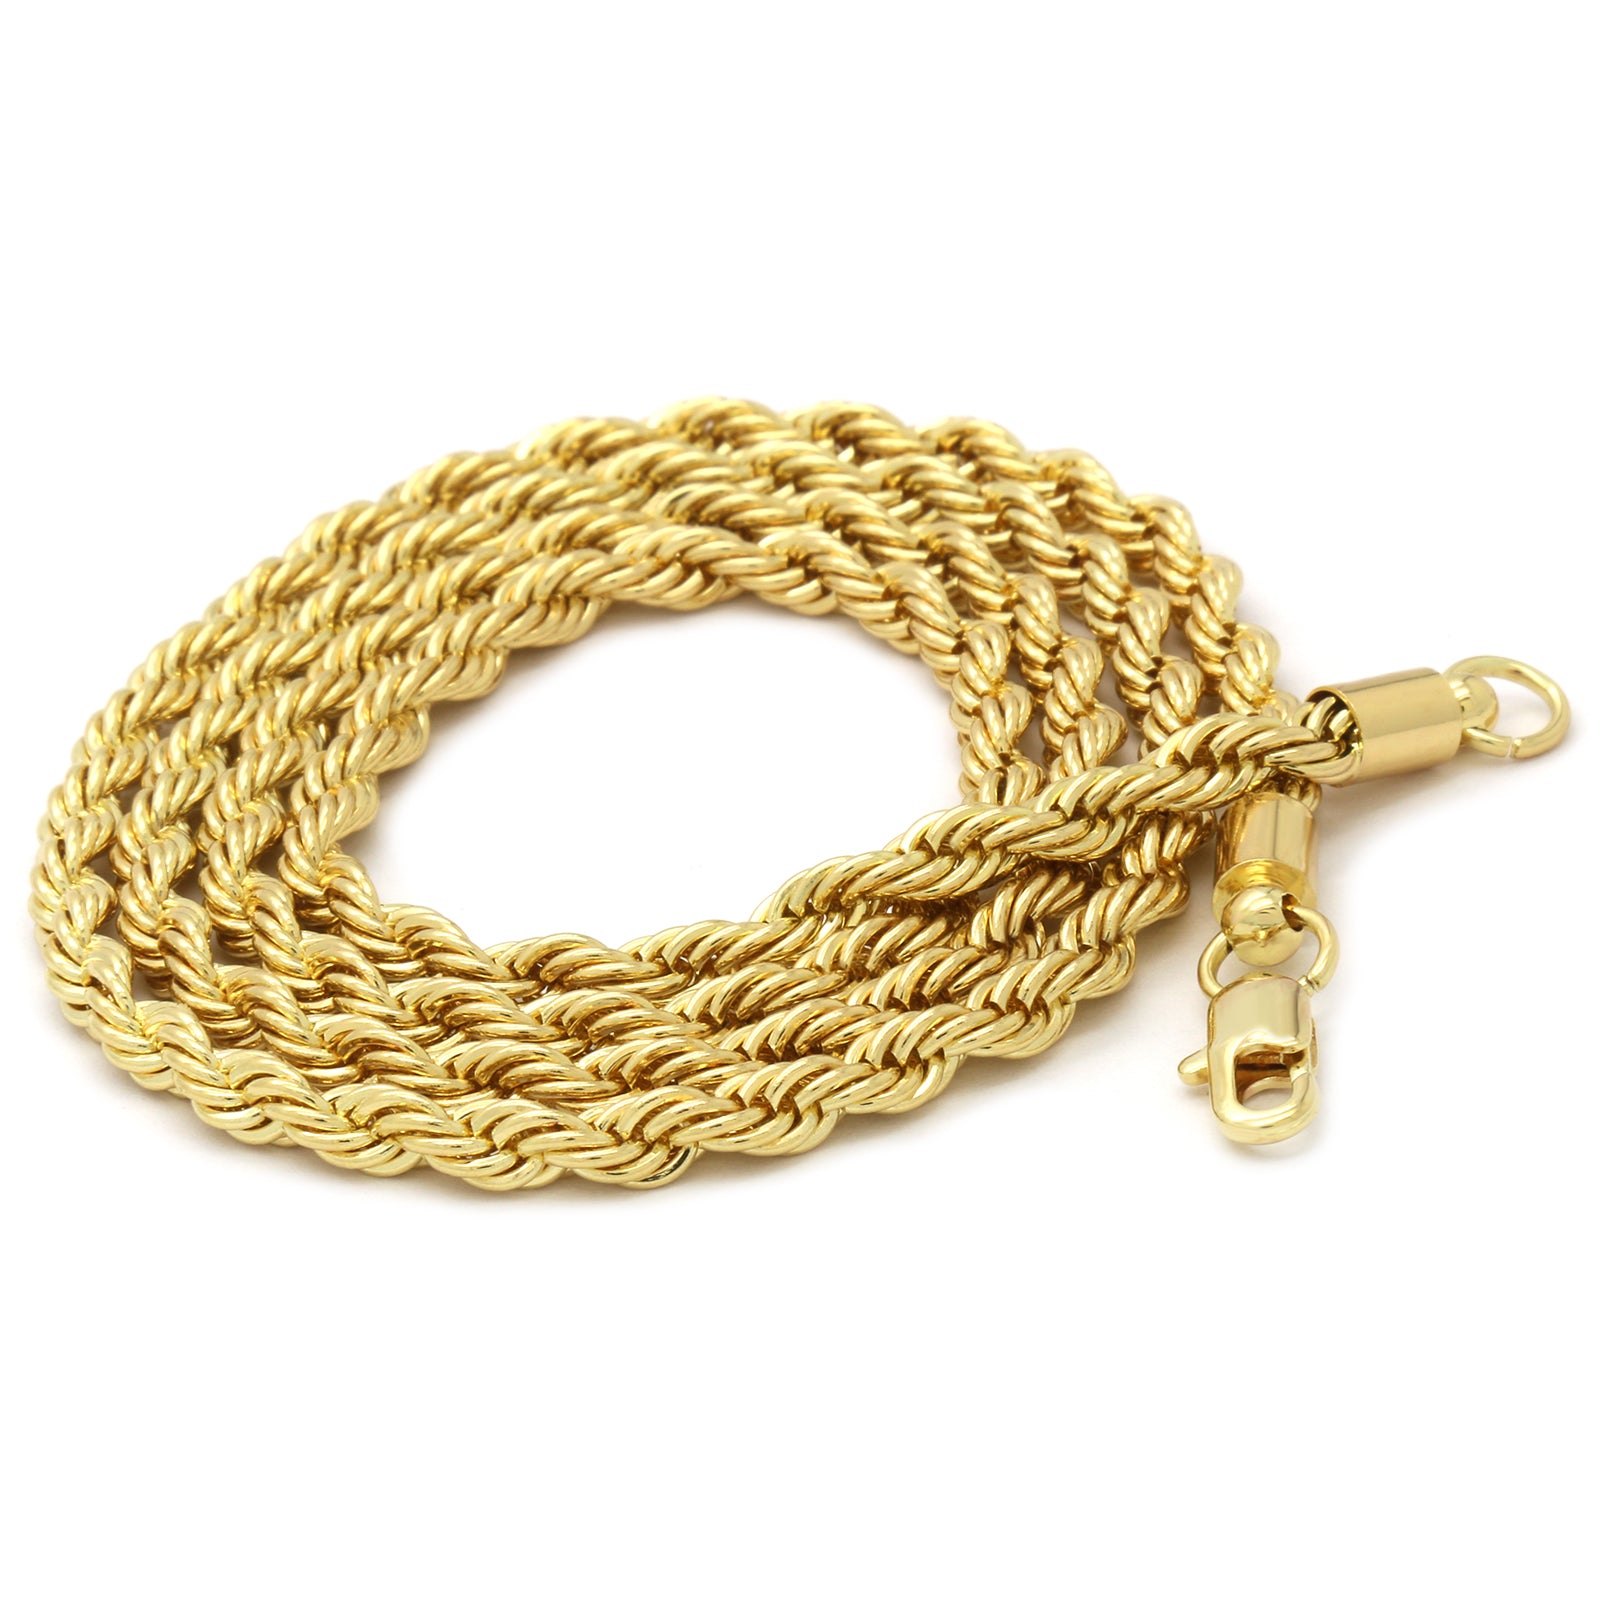 DRIP 23 PENDANT WITH GOLD ROPE CHAIN